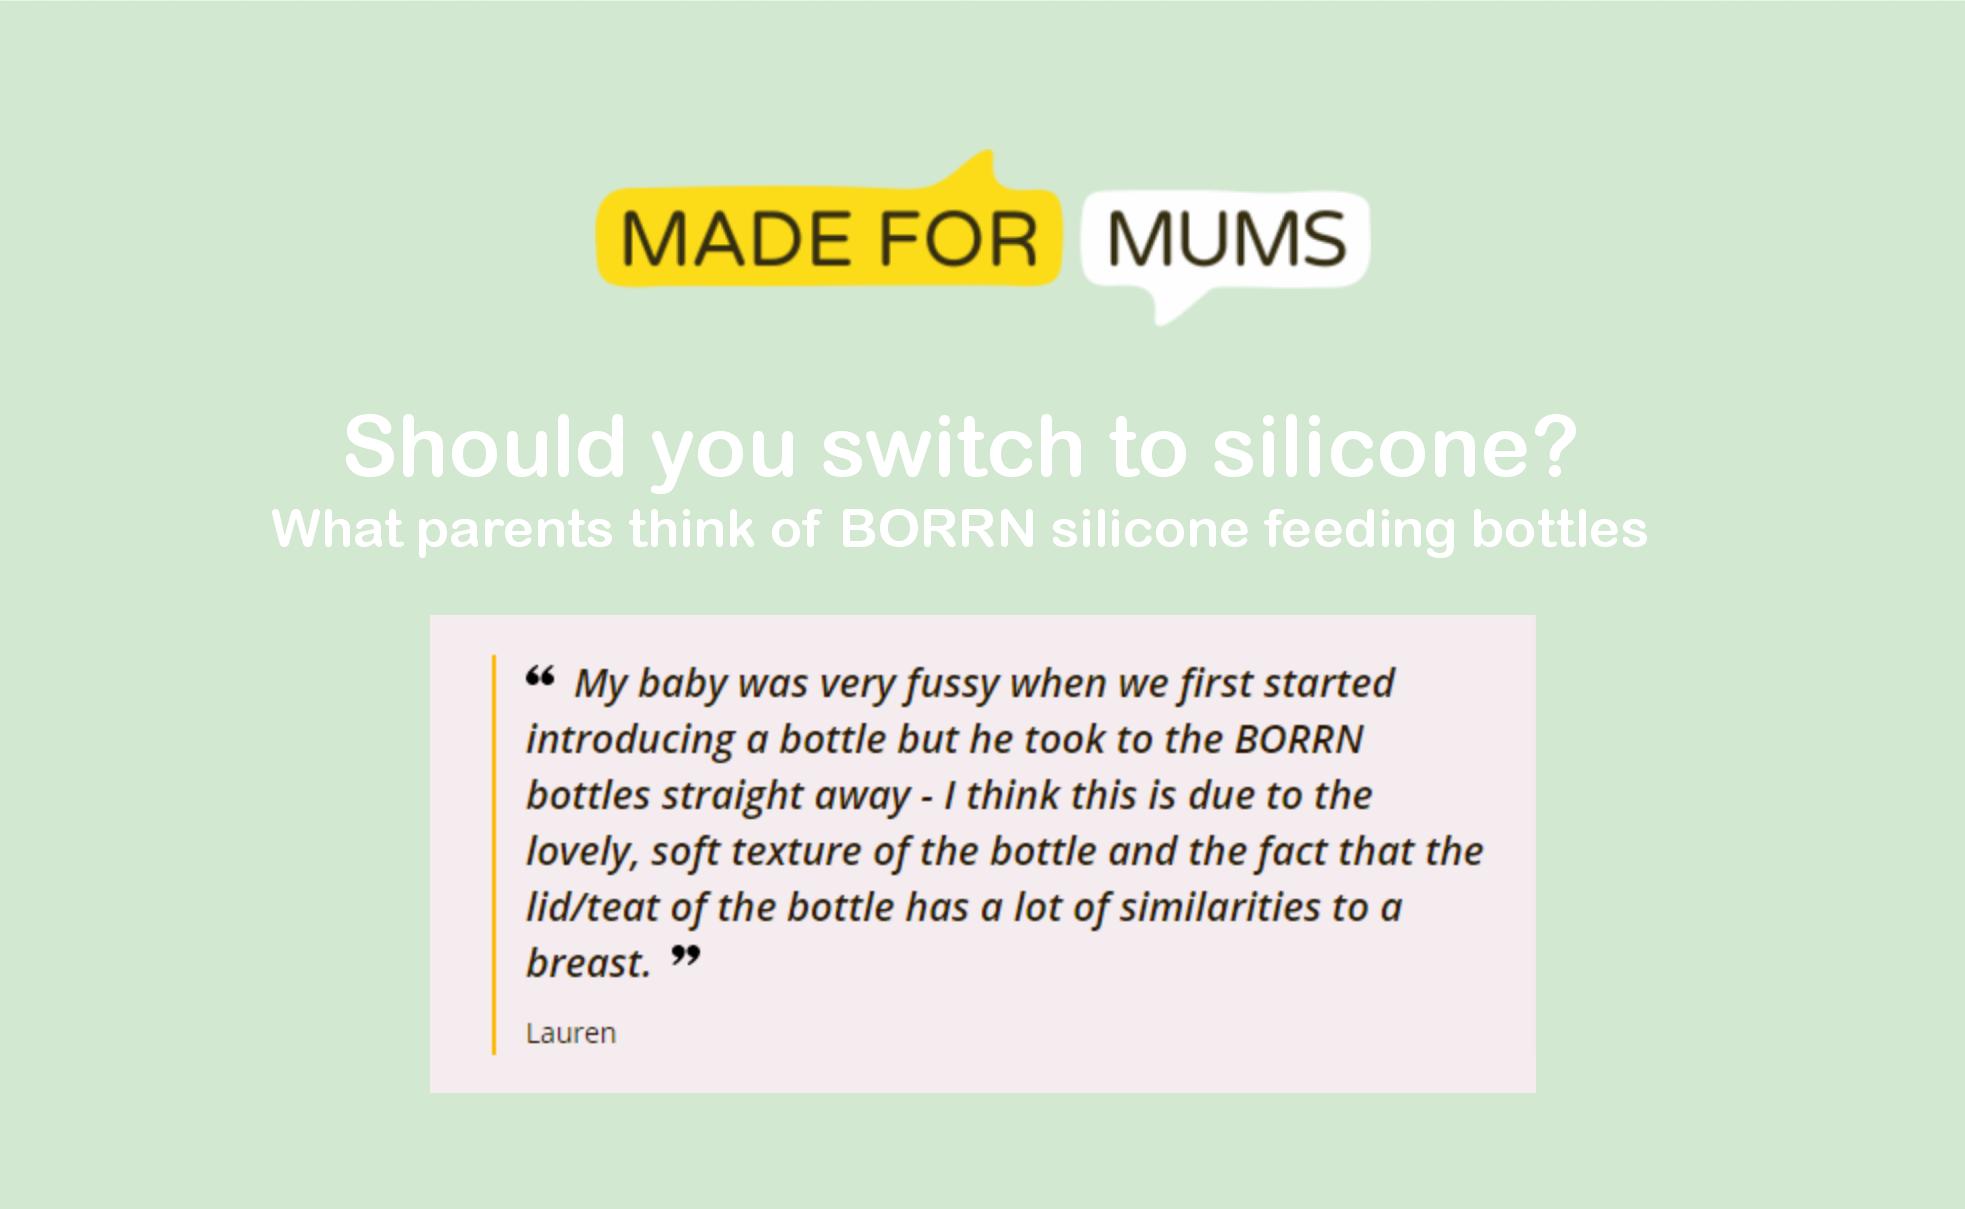 Should you switch to silicone? What parents think of BORRN silicone feeding bottles.